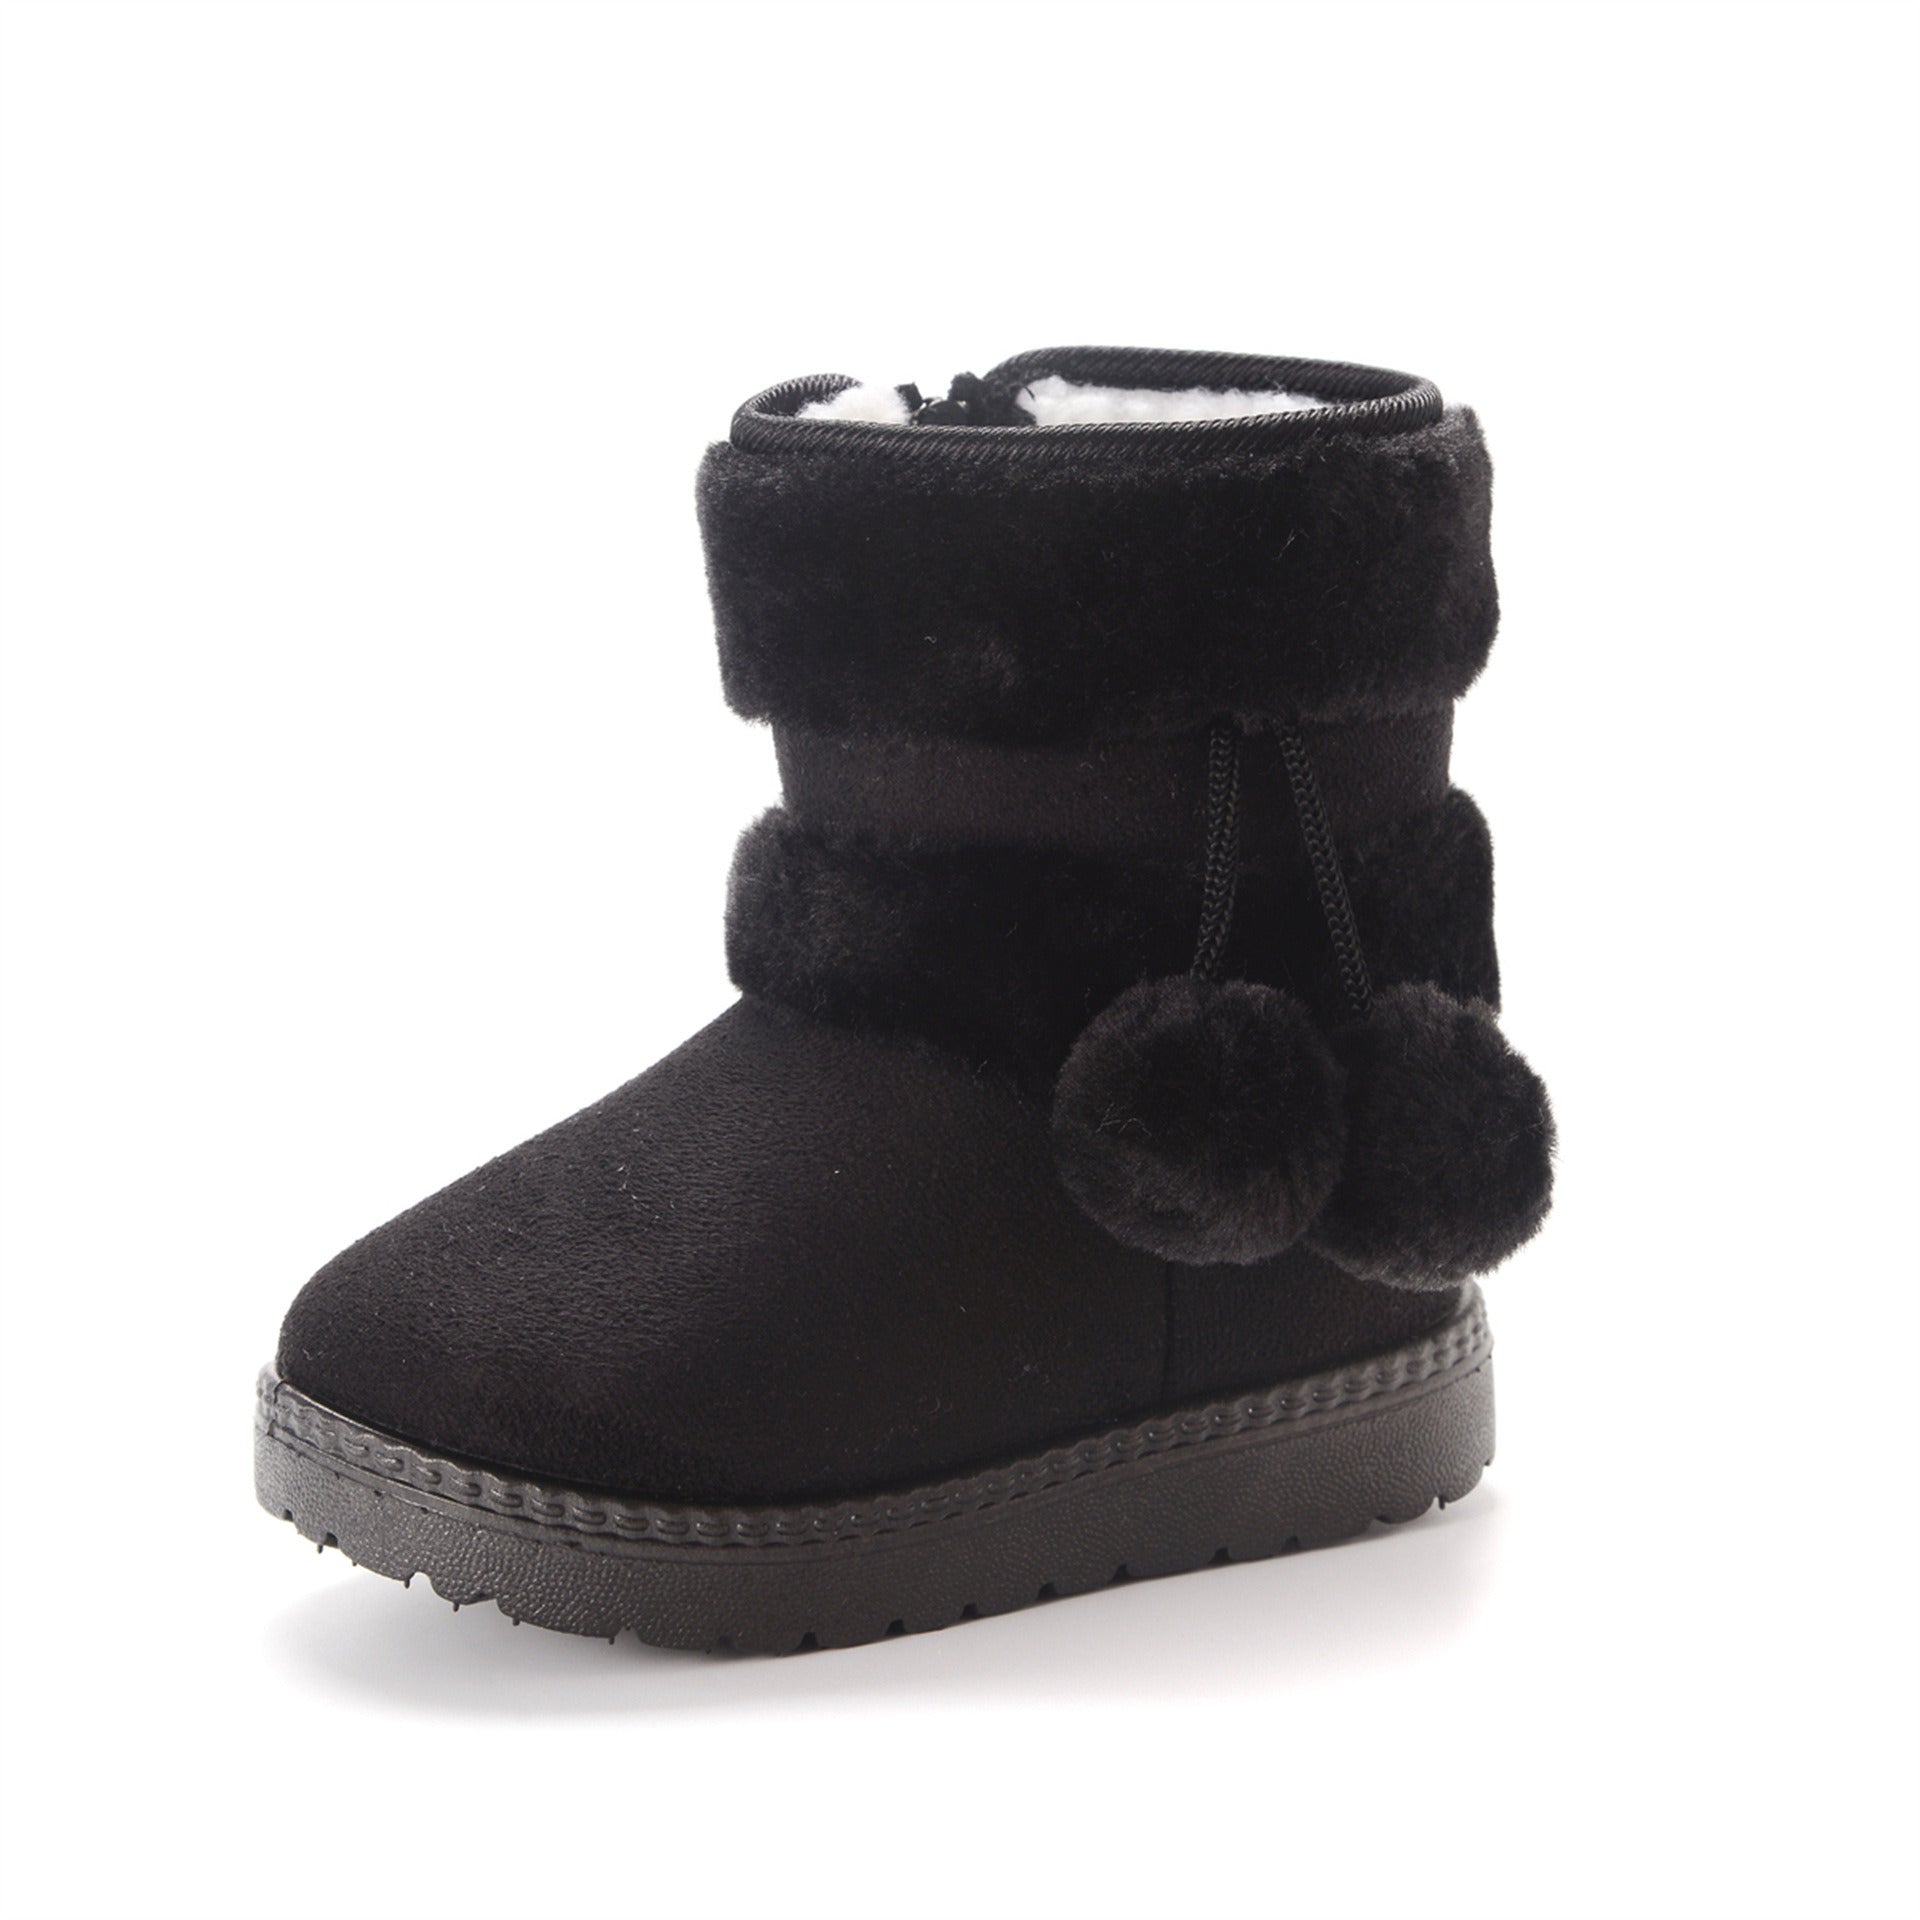 New Winter Furry Shoes Girls with Cute Hairball Baby Kids High Top Snow Boots Anti-proof Warmer School Children Fur Boots E08014